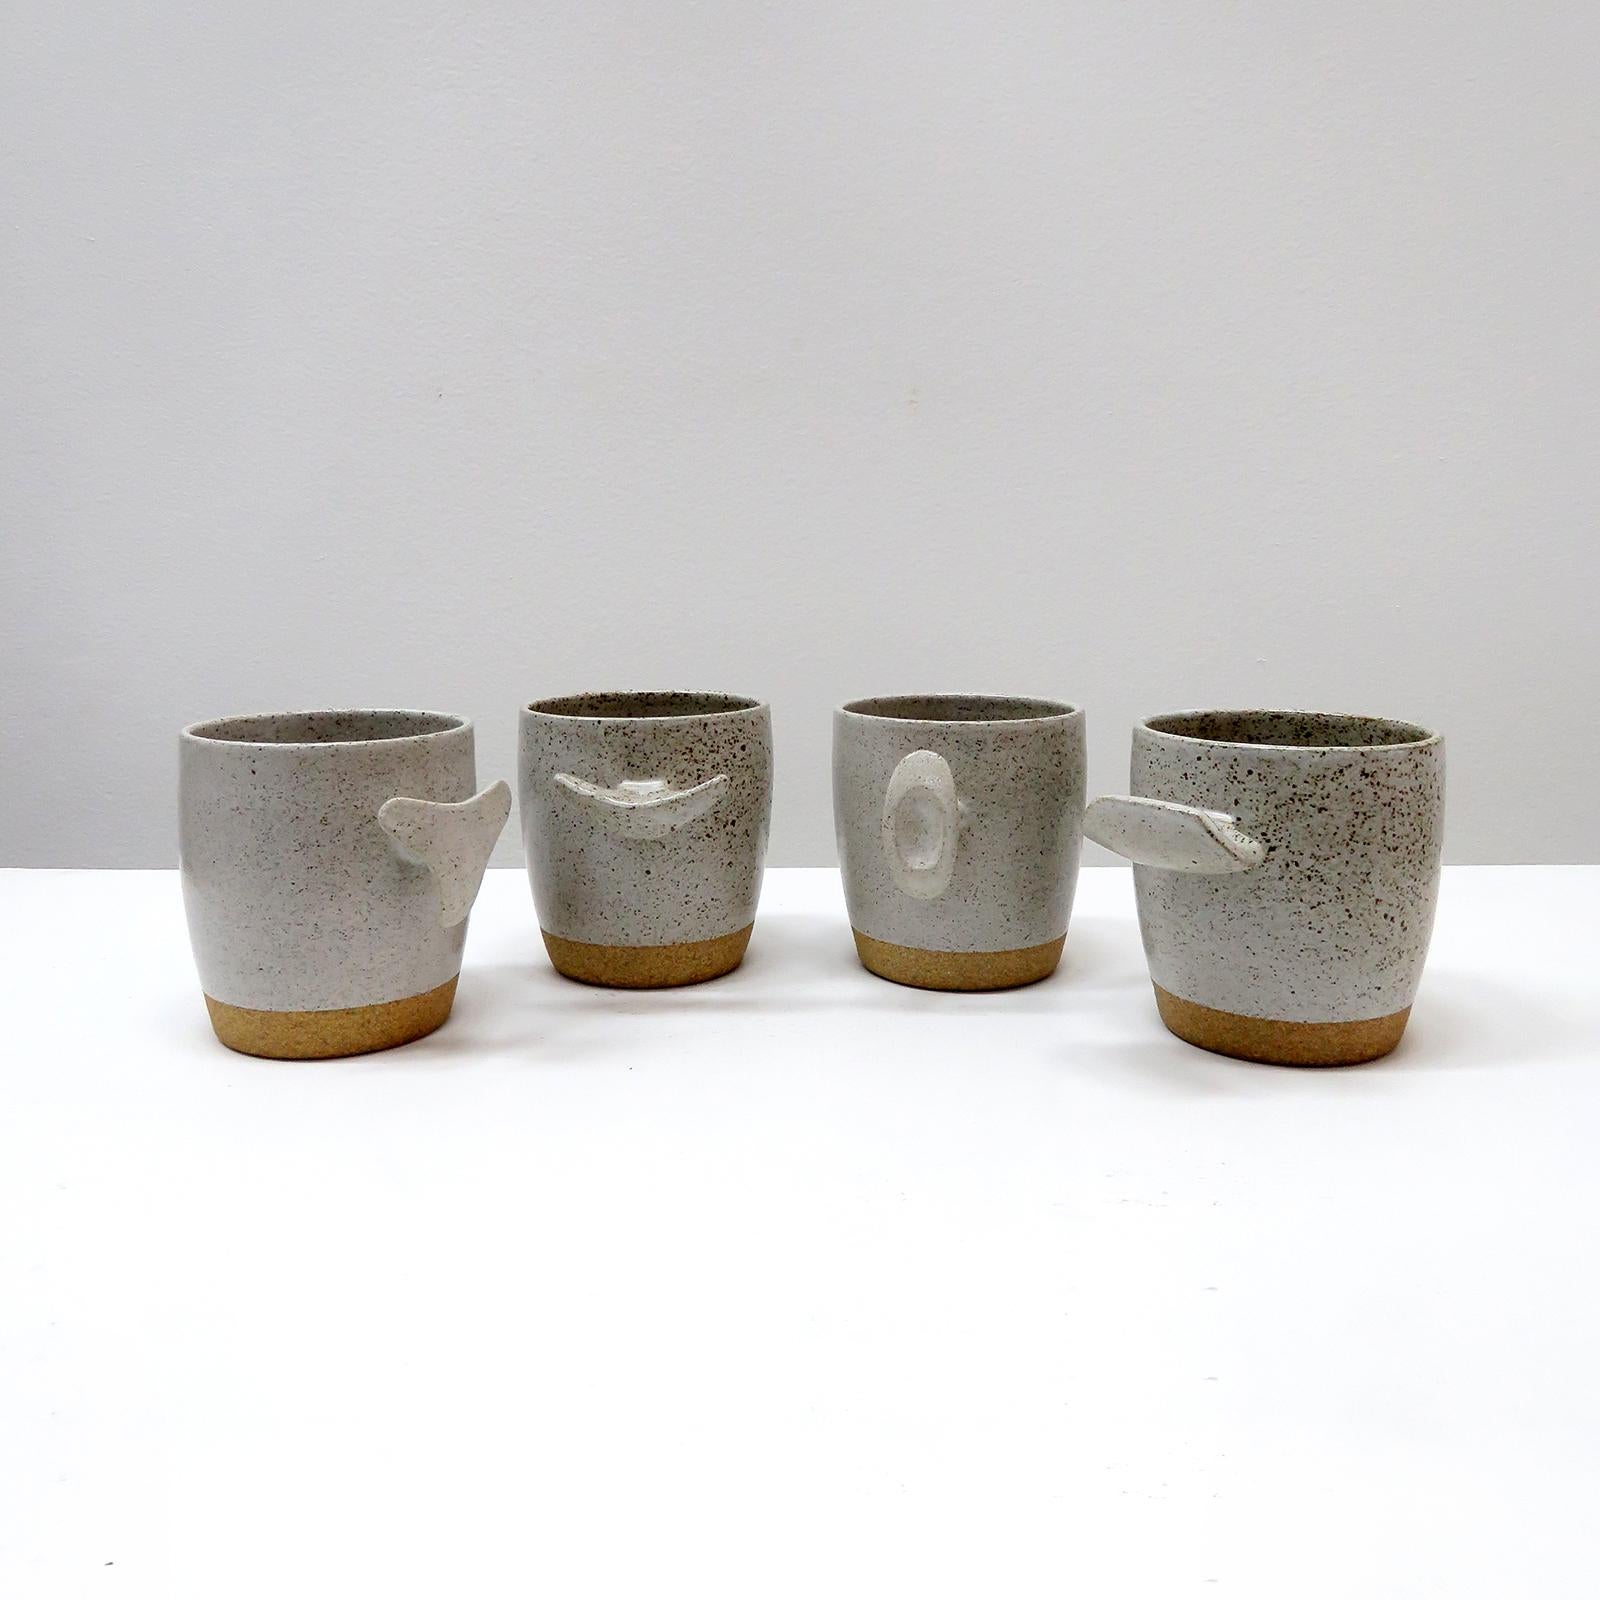 wonderful 'Cope' mugs, handcrafted by Los Angeles based ceramicist Jed Farlow for Farlow Design. High fired stoneware with matte white speckled glaze. Designed with a human-centered approach in mind, these one-of-a-kind mugs are experimenting with